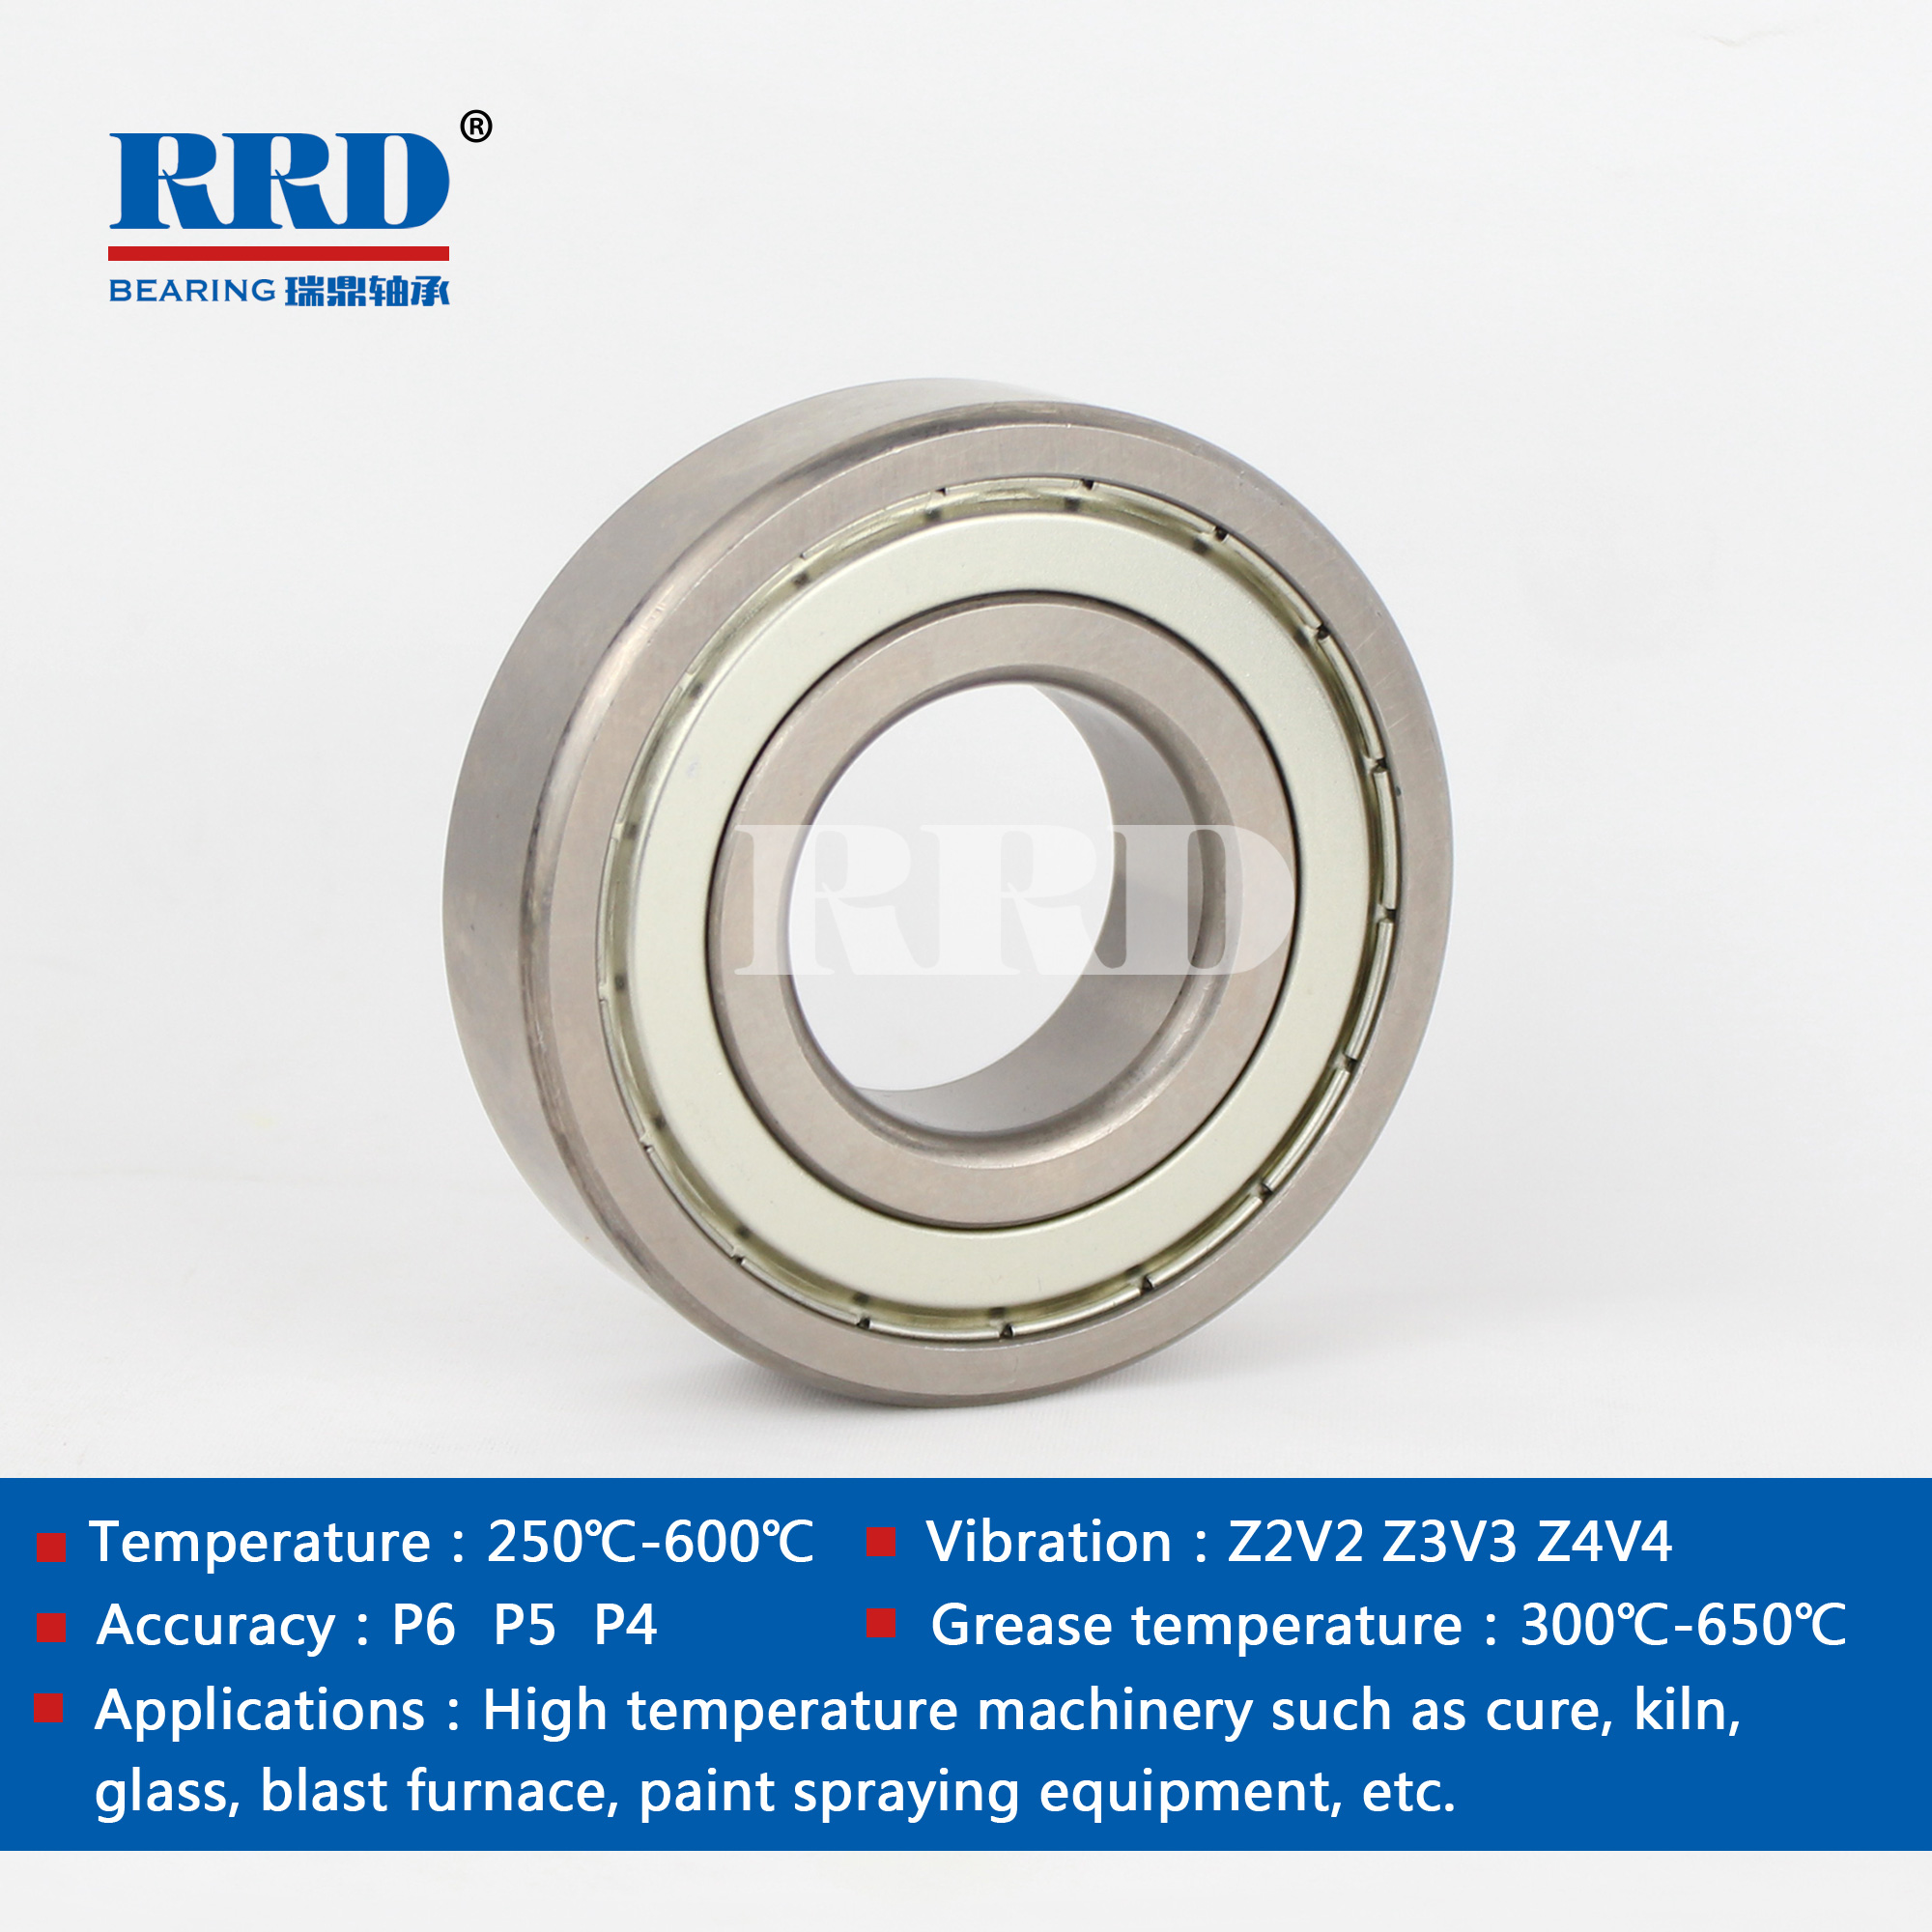 High temperature iron sealed deep groove ball bearings